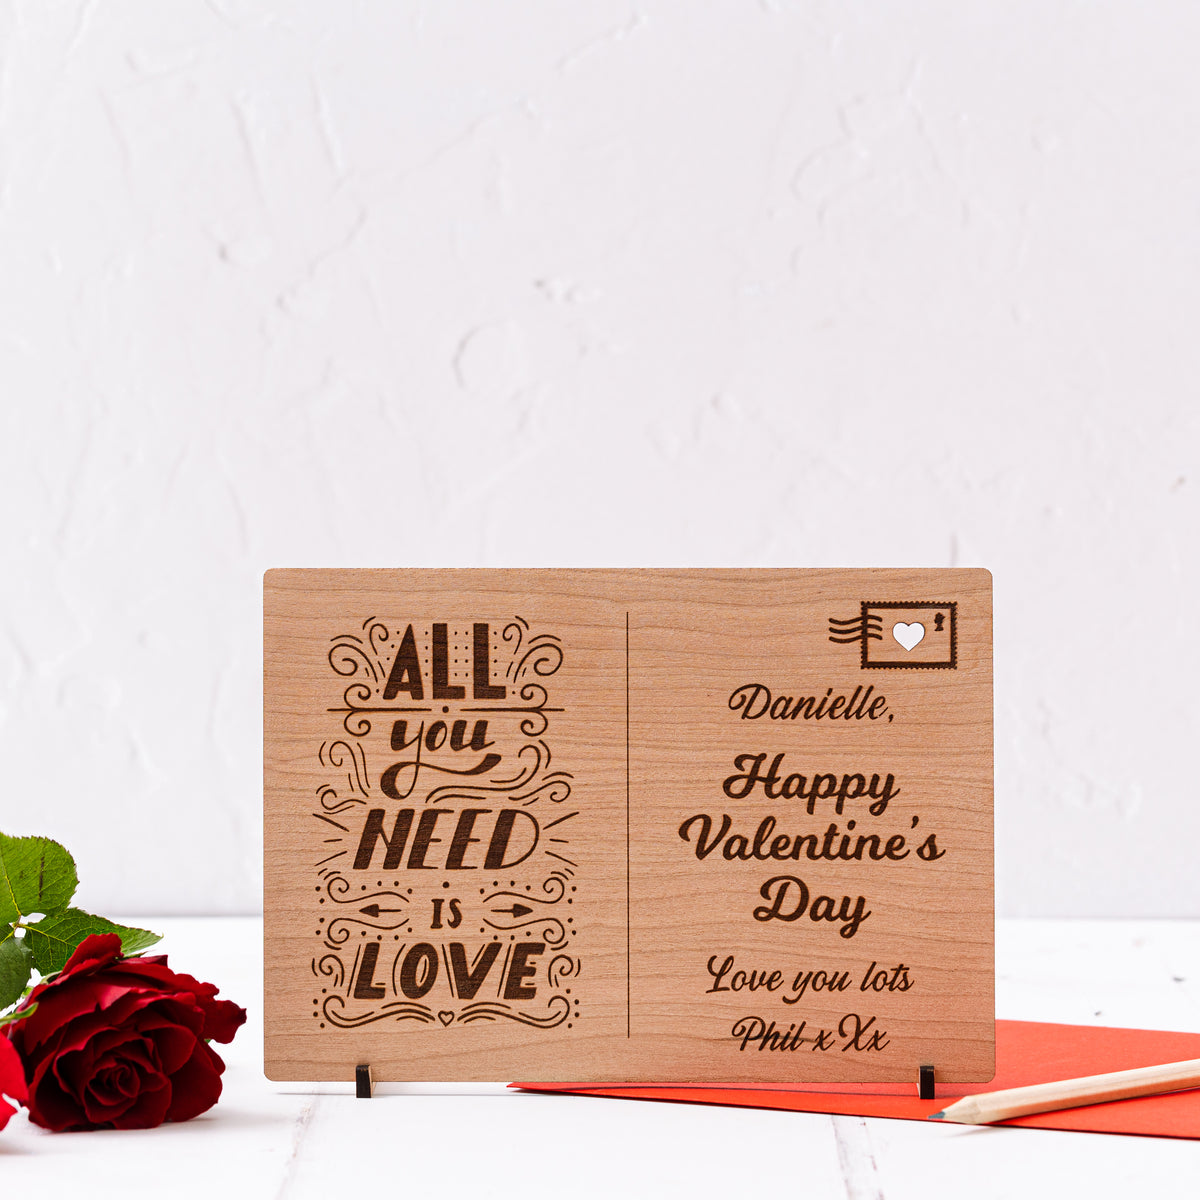 &#39;All you need is Love&#39; Wooden Valentine&#39;s Day Post Card